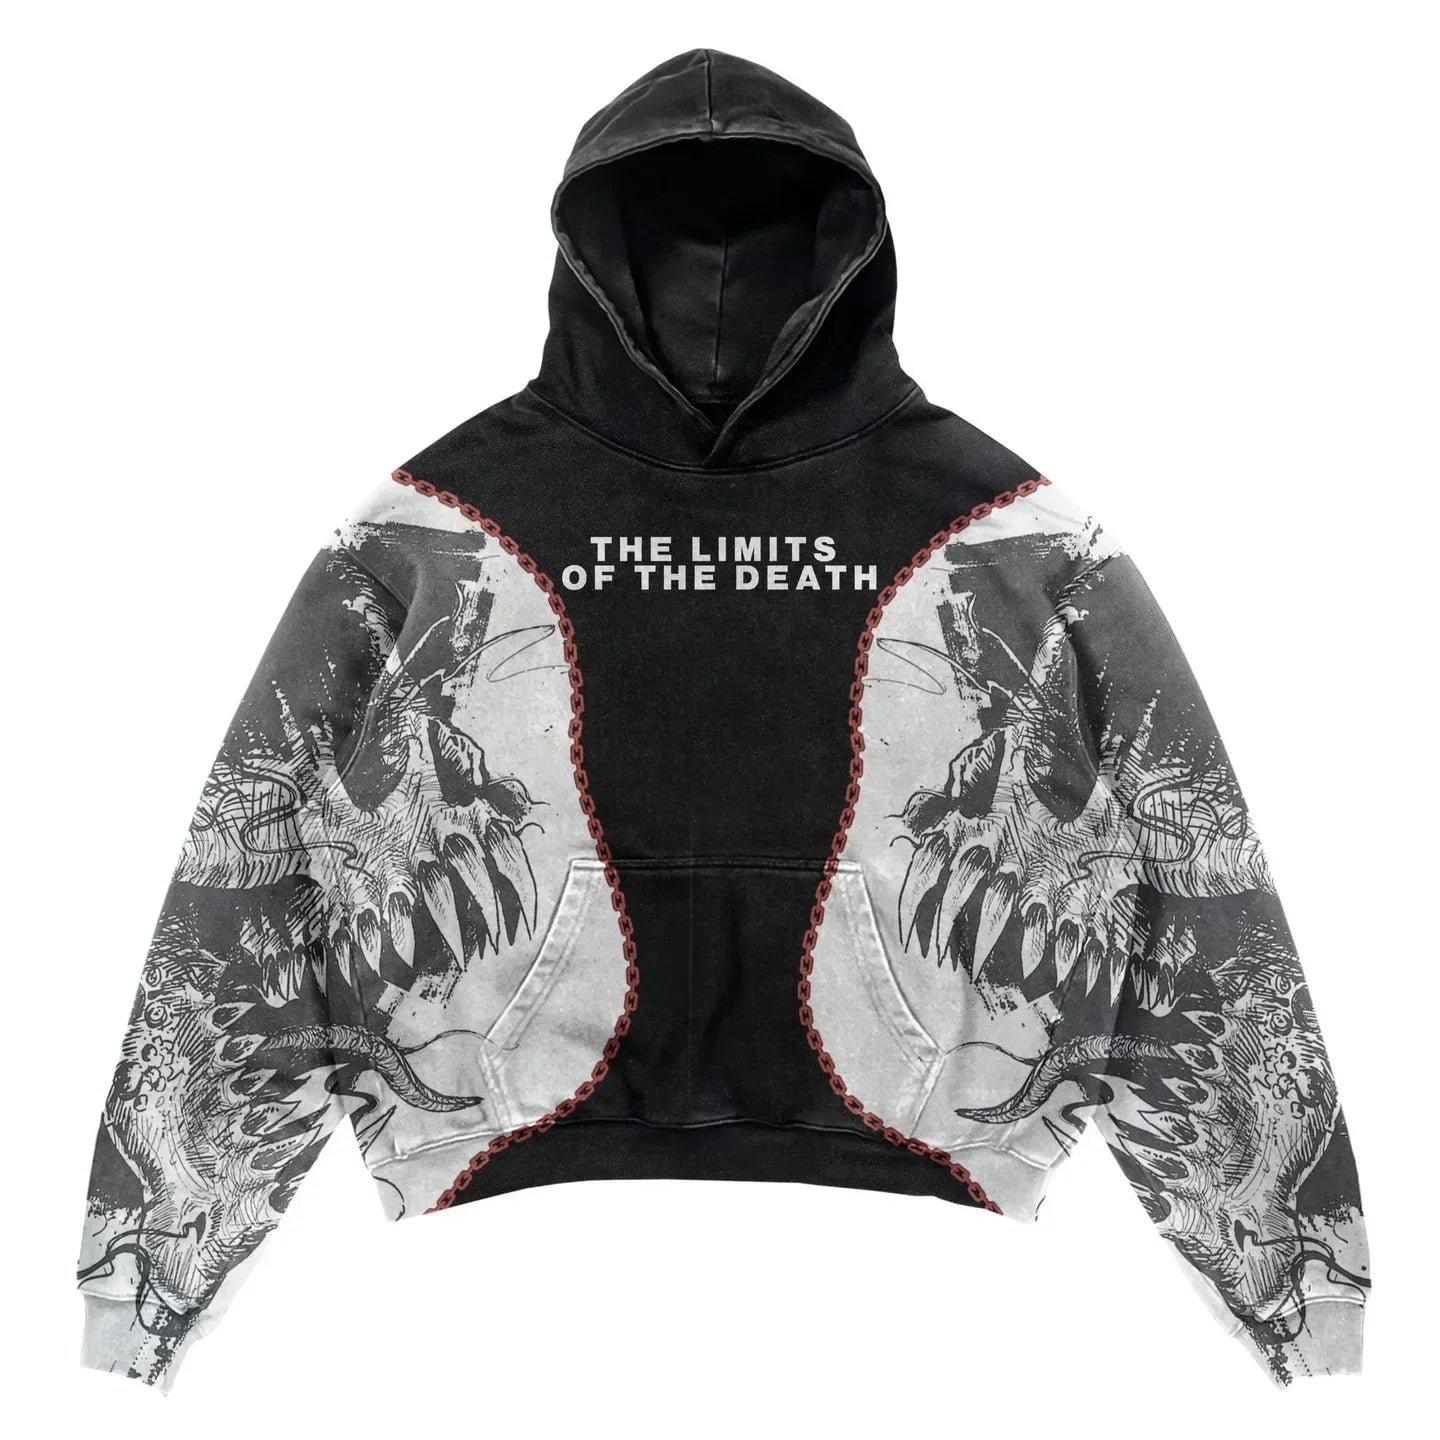 A Maramalive™ Explosions Printed Skull Y2K Retro Hooded Sweater Coat Street Style Gothic Casual Fashion Hooded Sweater Men's Female—a perfect addition to any men's fashion collection for those who embrace punk style.